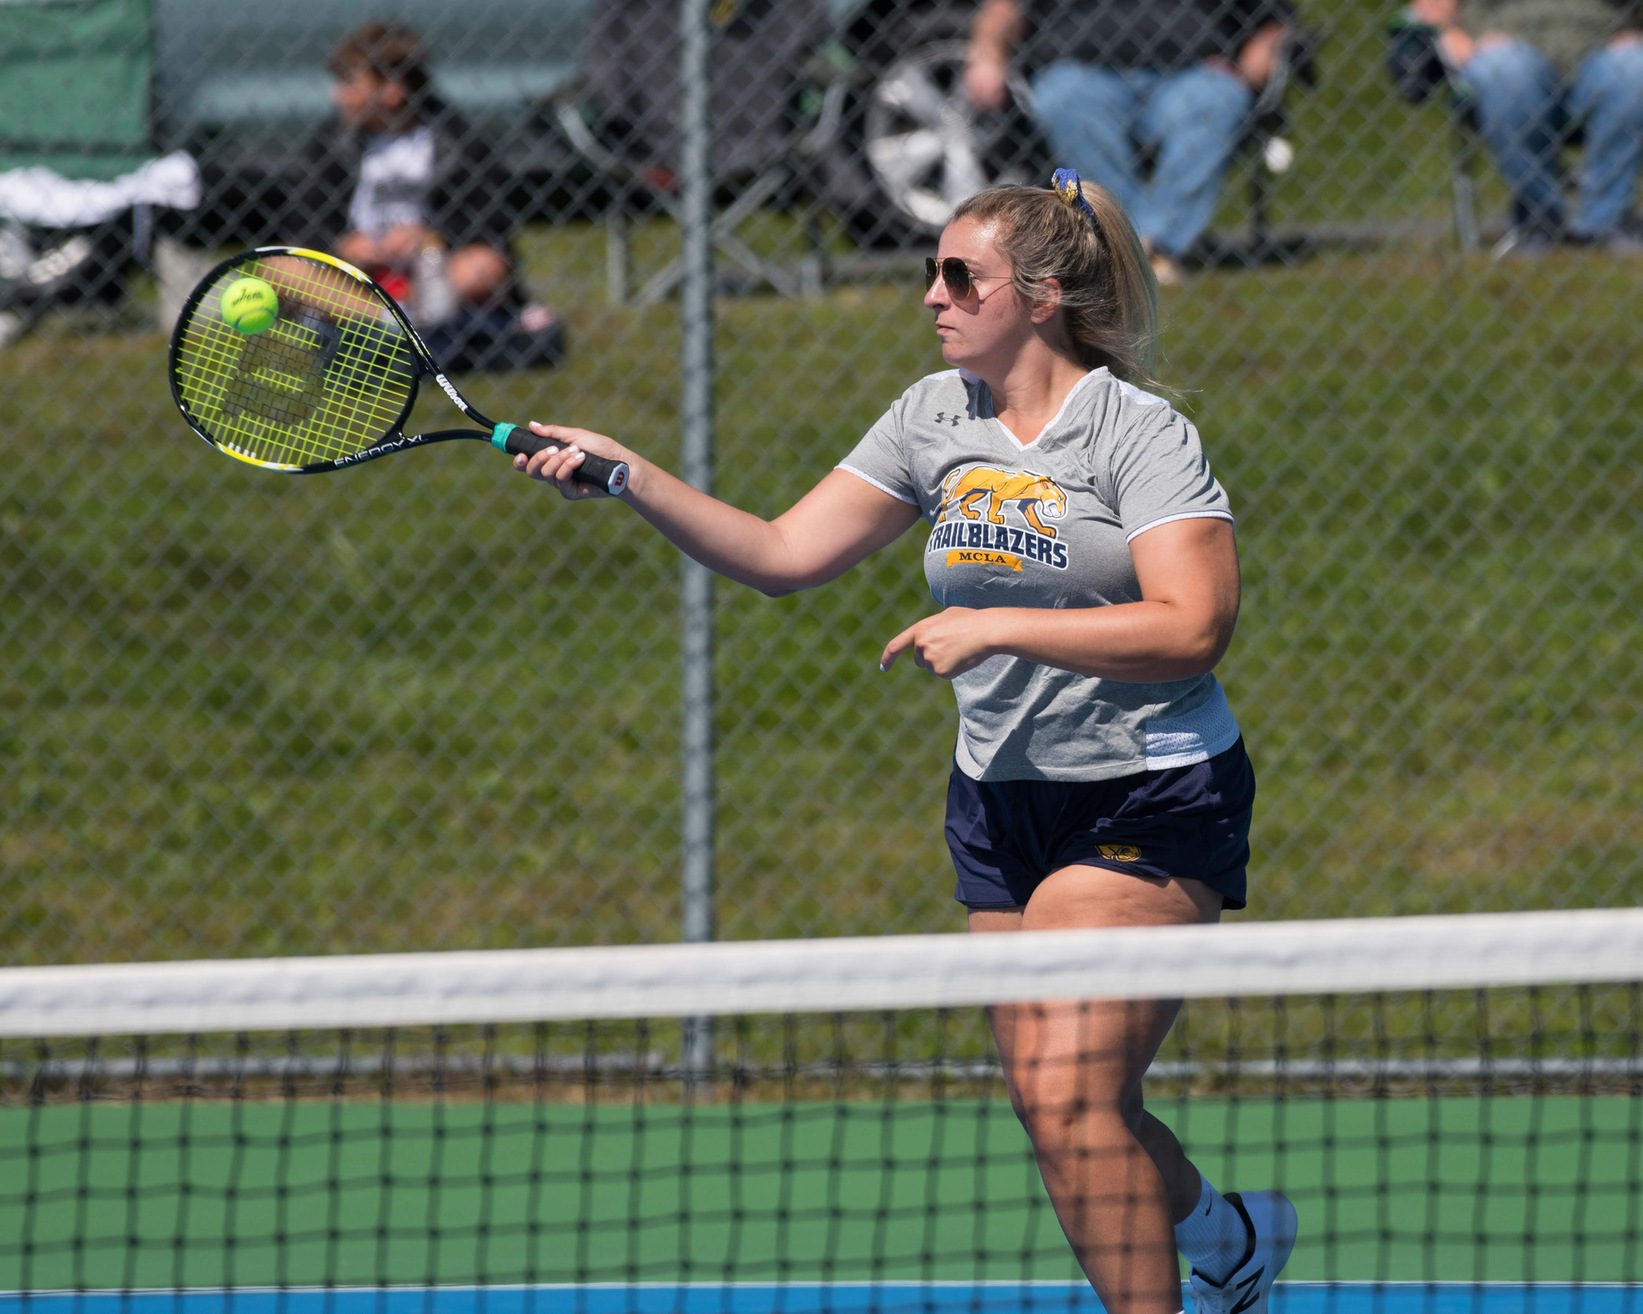 Keegan earns all tournament honors, but Trailblazers fall in NAC semifinals to Lesley 5-1